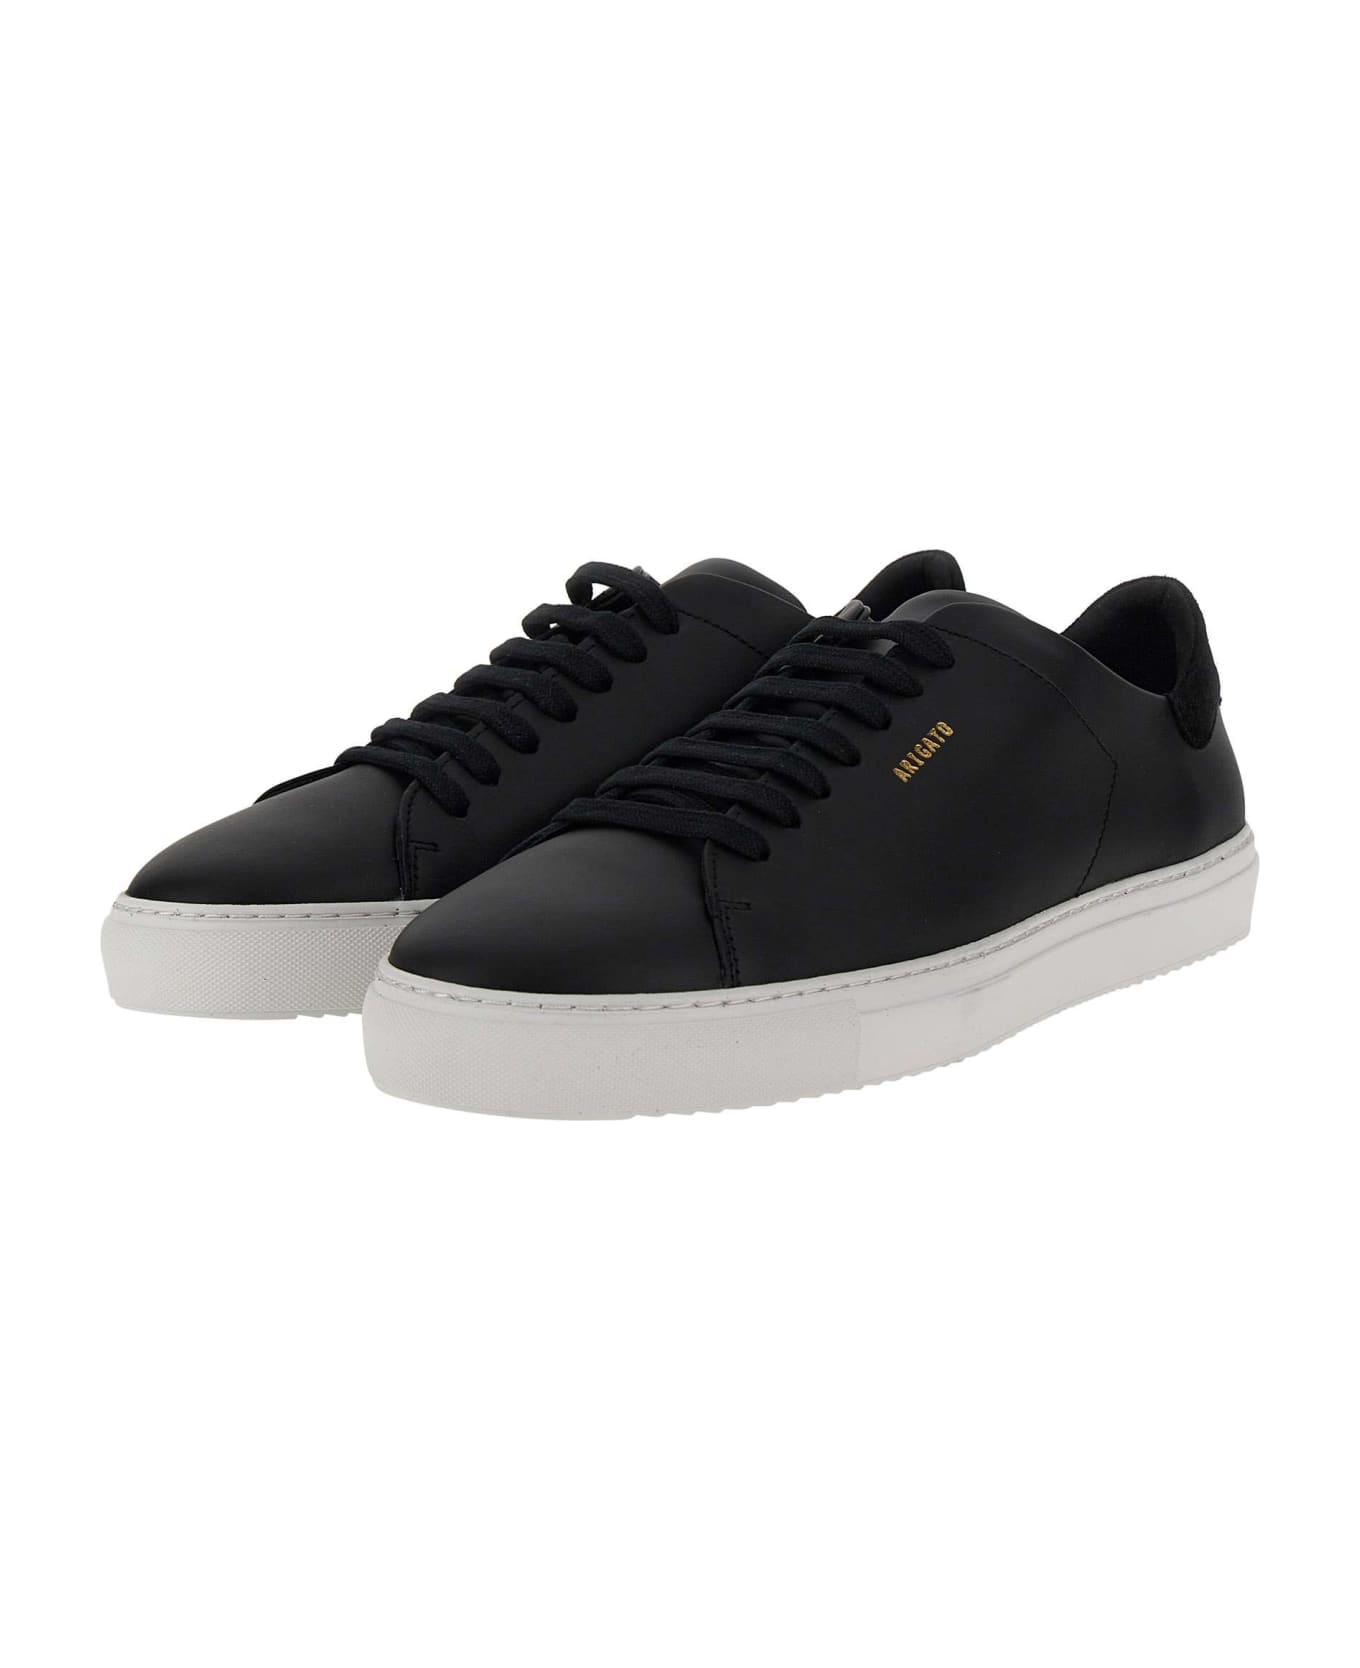 Axel Arigato "clean 90" Sneakers Leather - BLACK